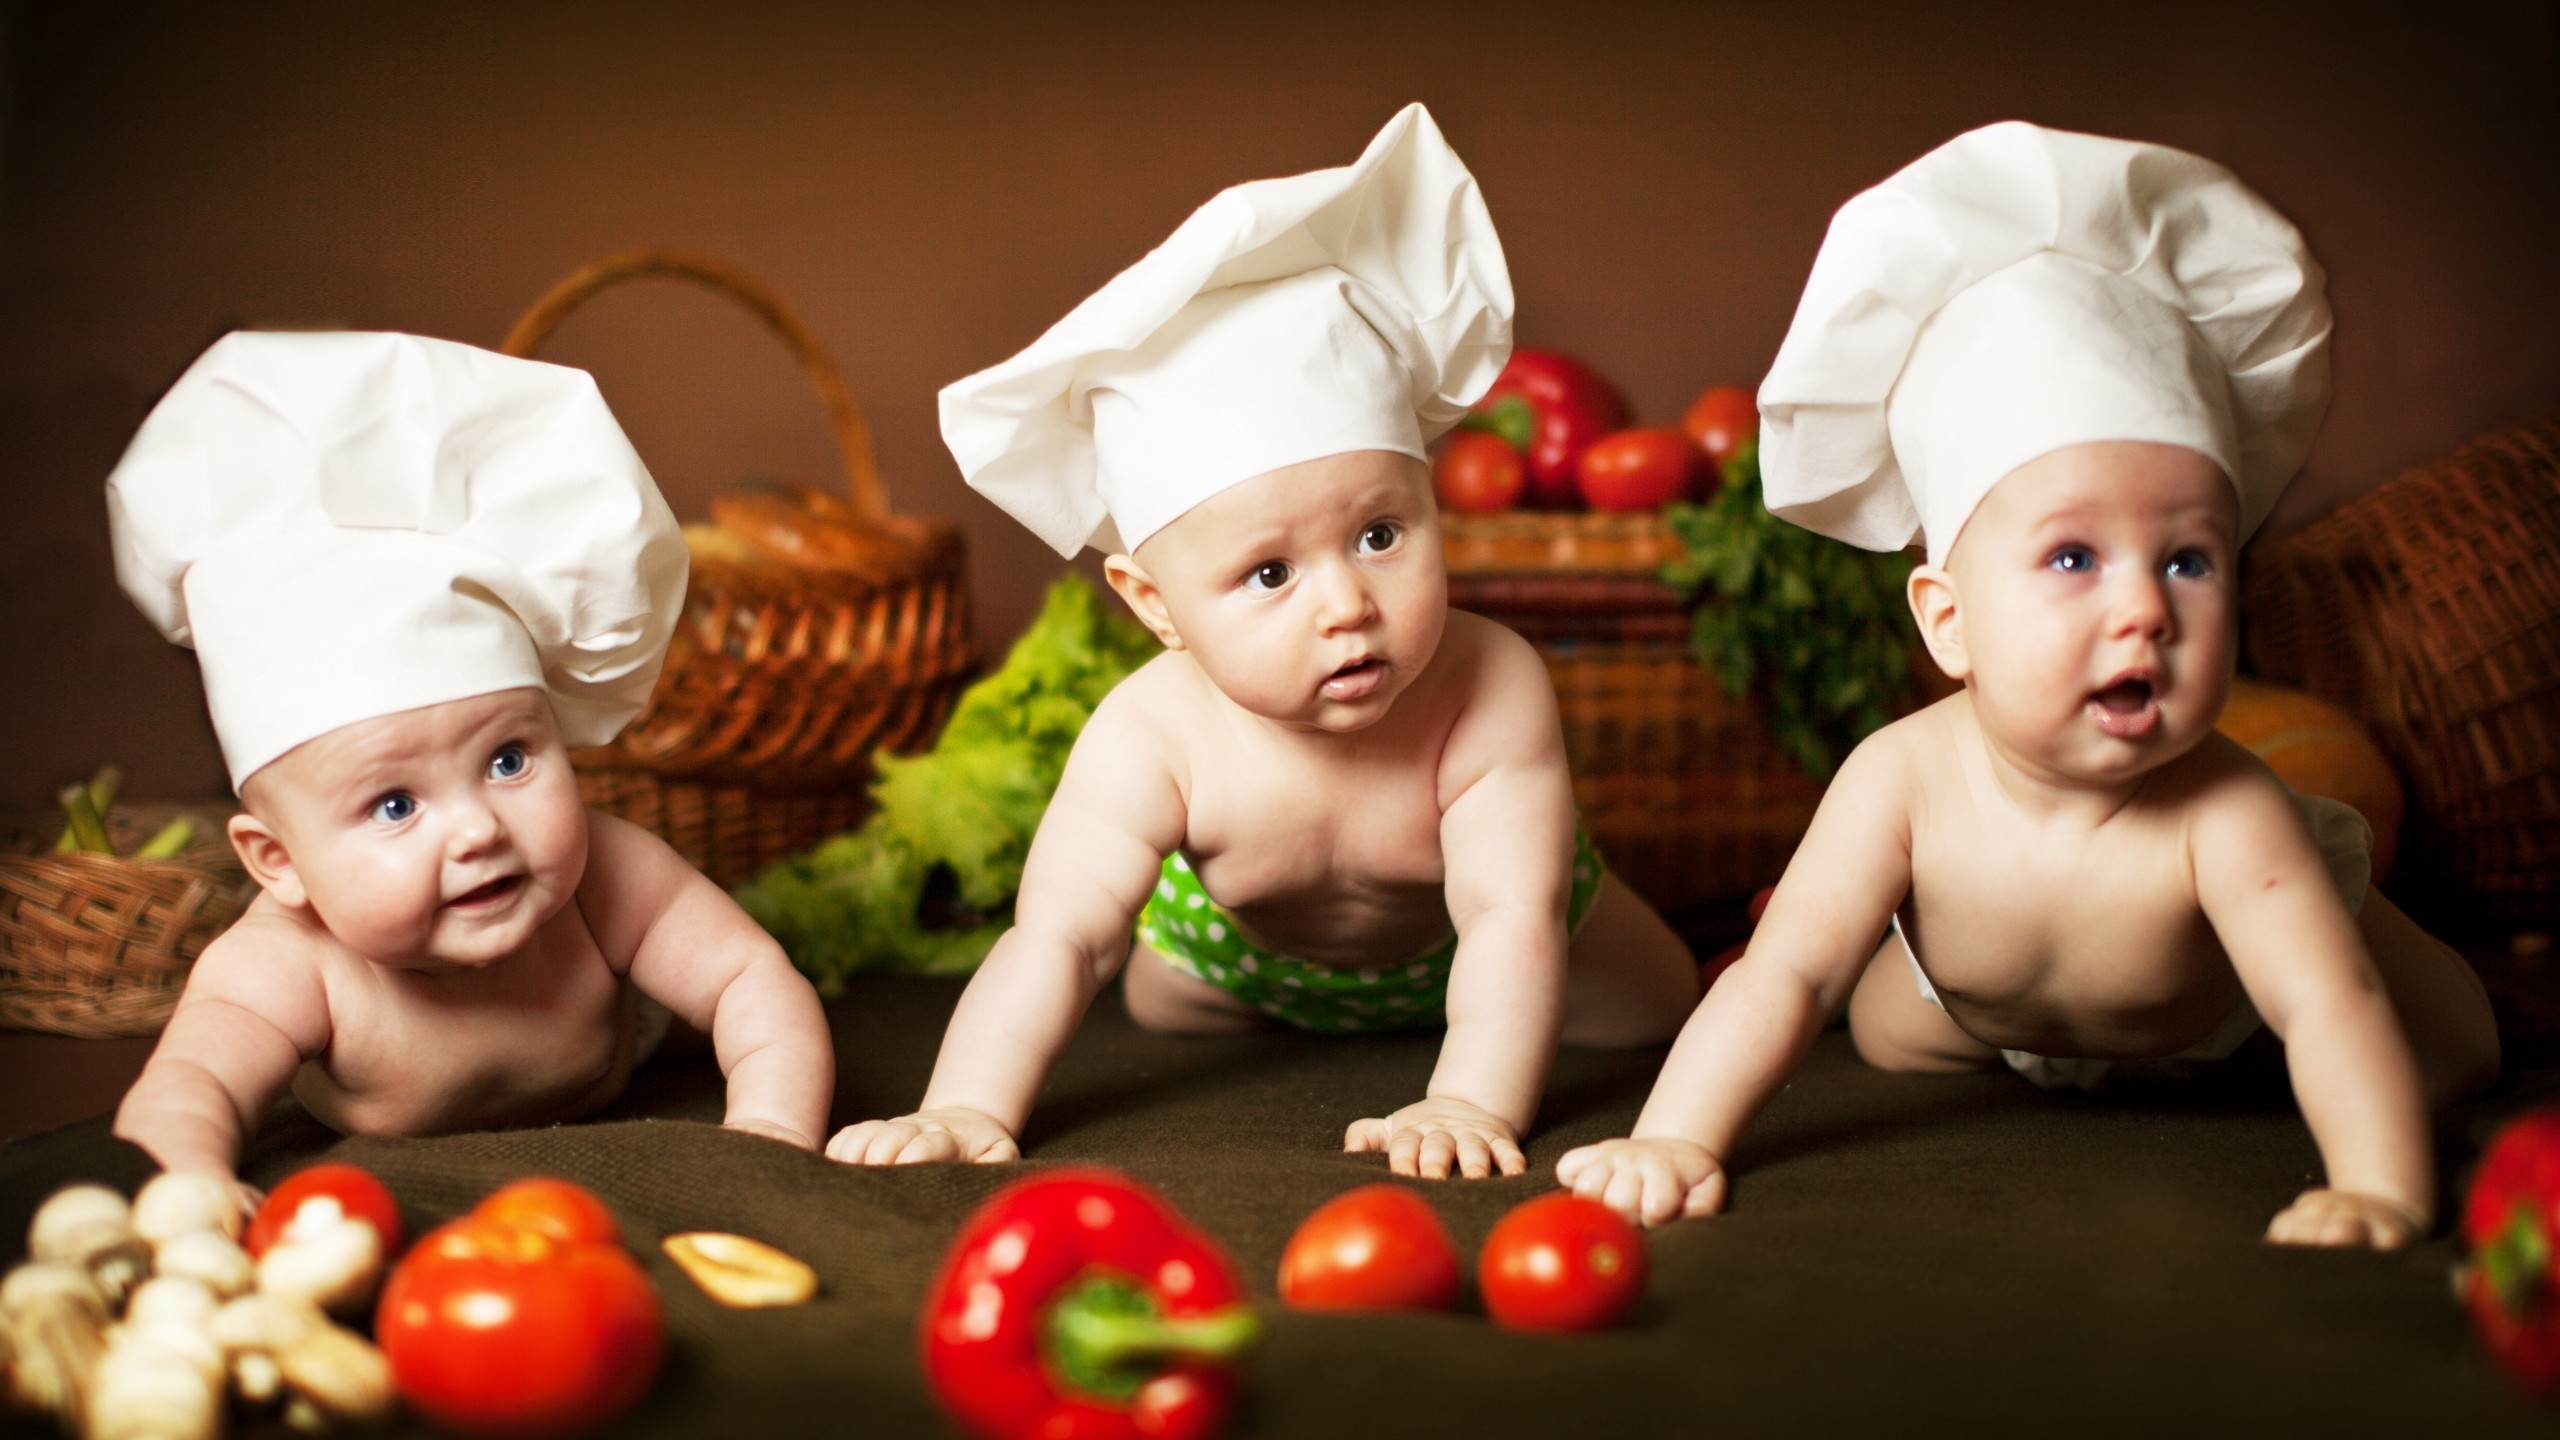 Baby Chefs for 2560x1440 HDTV resolution